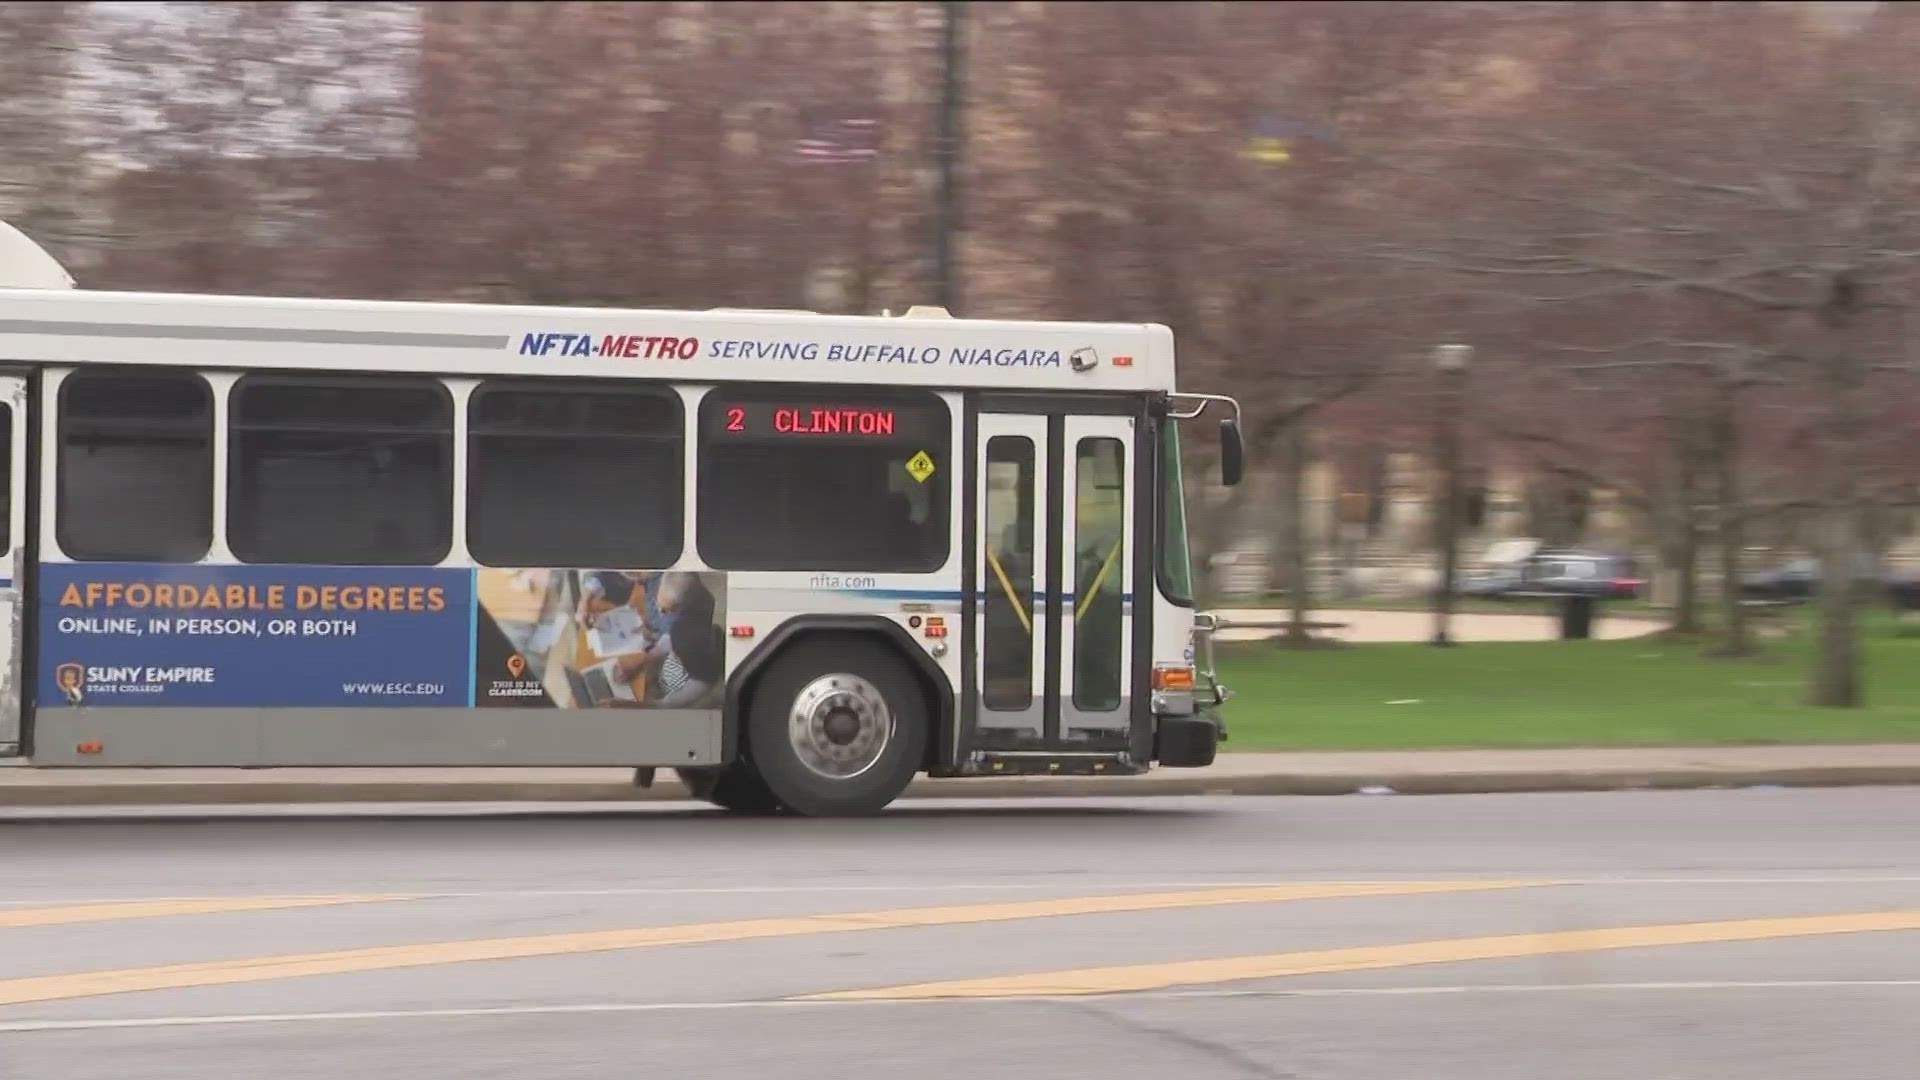 NFTA expanding use of an app that aids visually impaired individuals to its metro bus and rail line